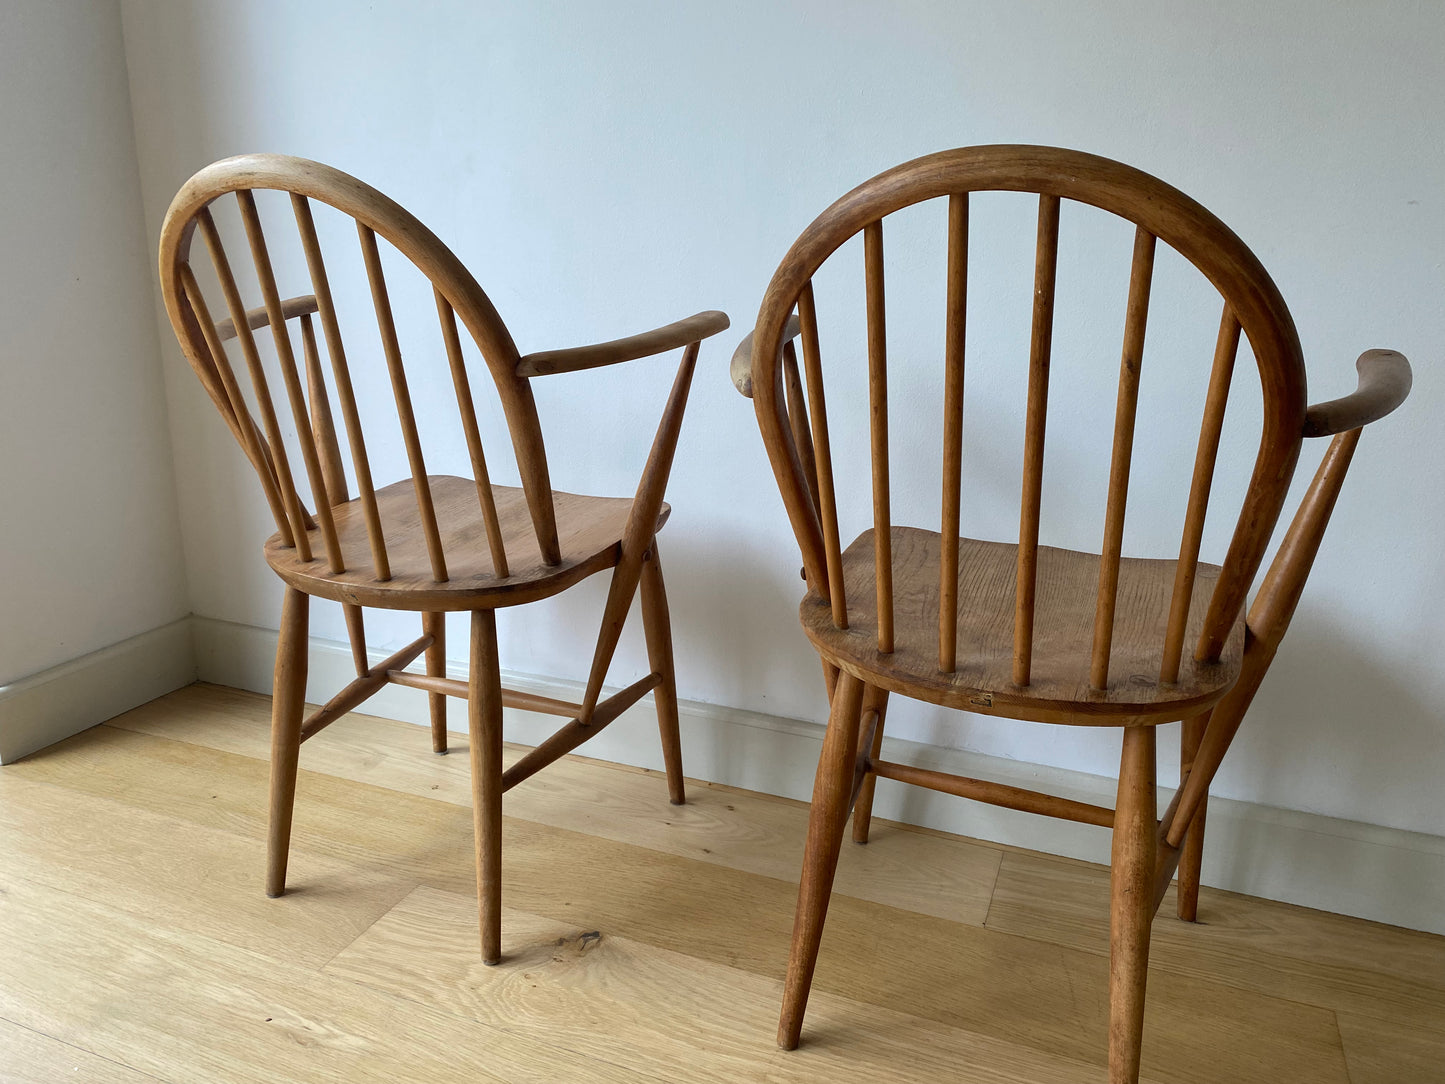 Ercol Windsor mid-century carver chairs